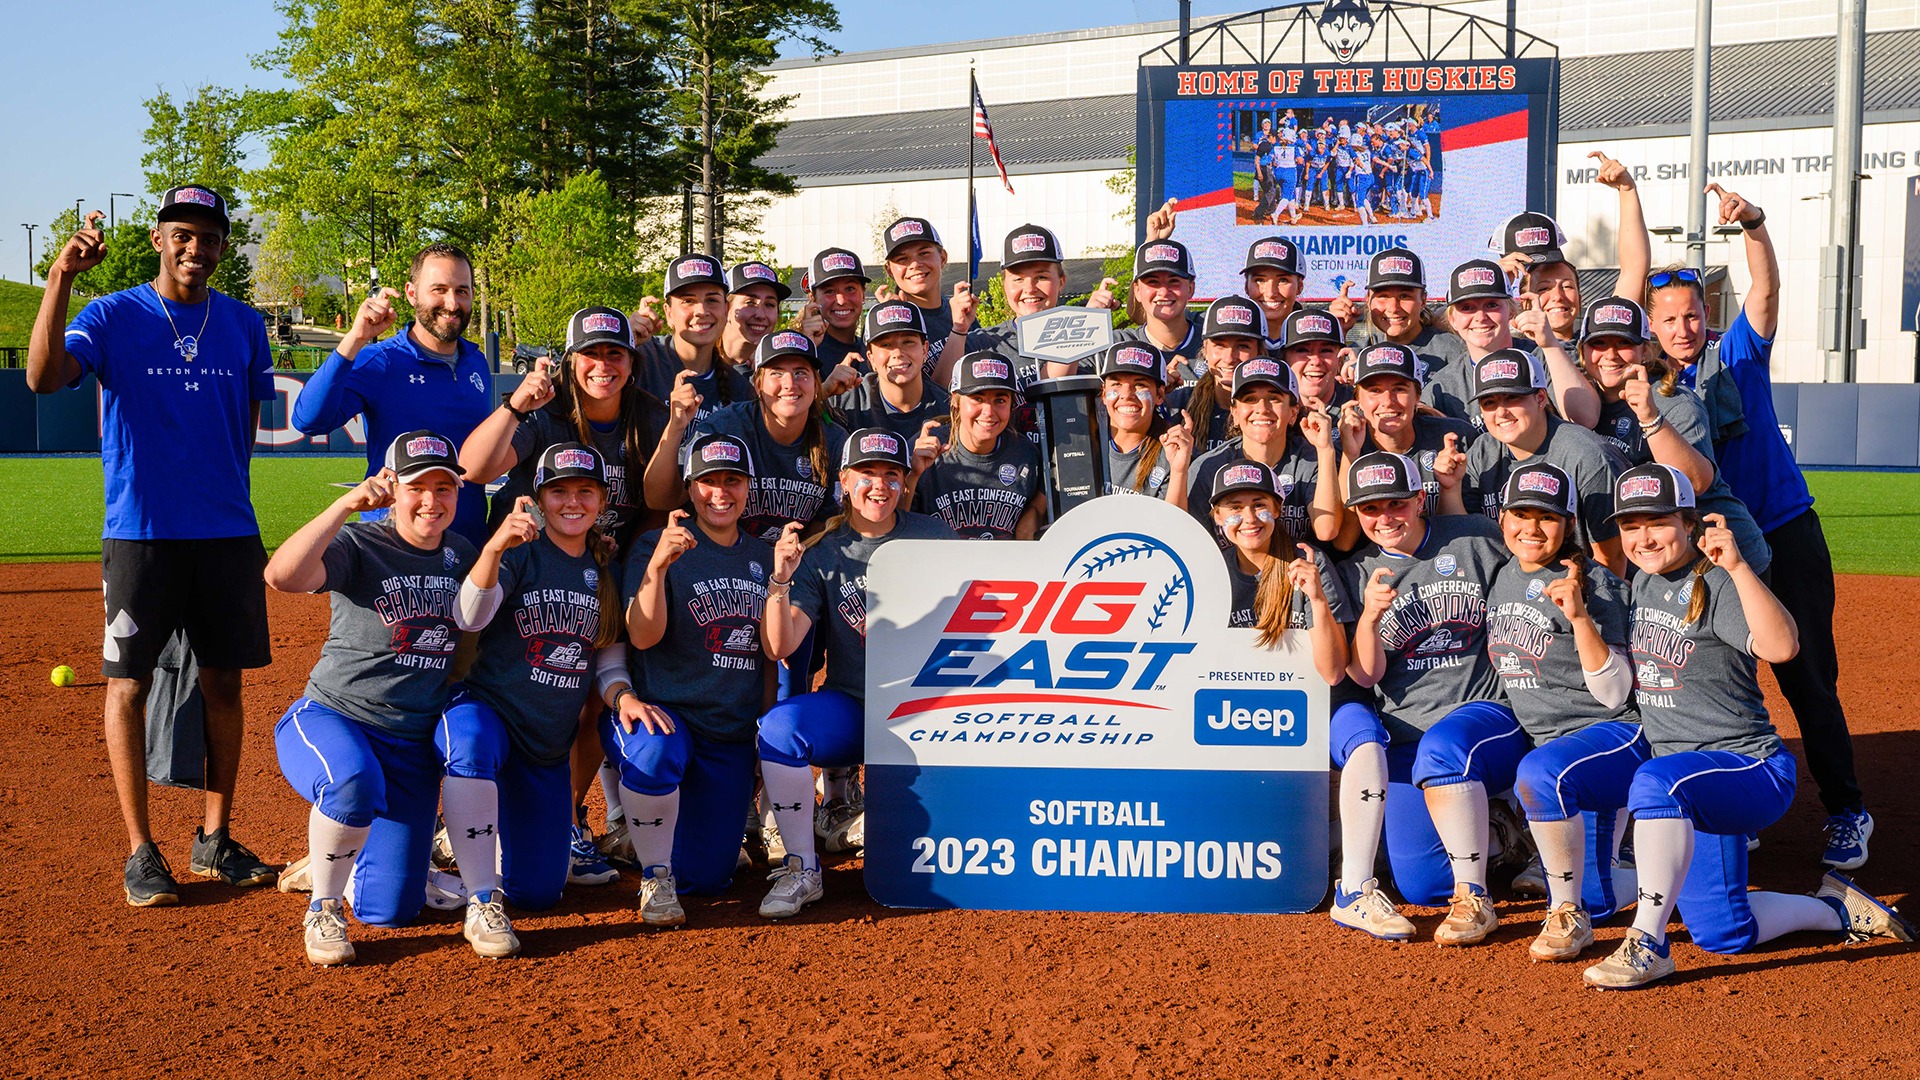 The Pirates pose for a picture as 2023 BIG EAST Champions!